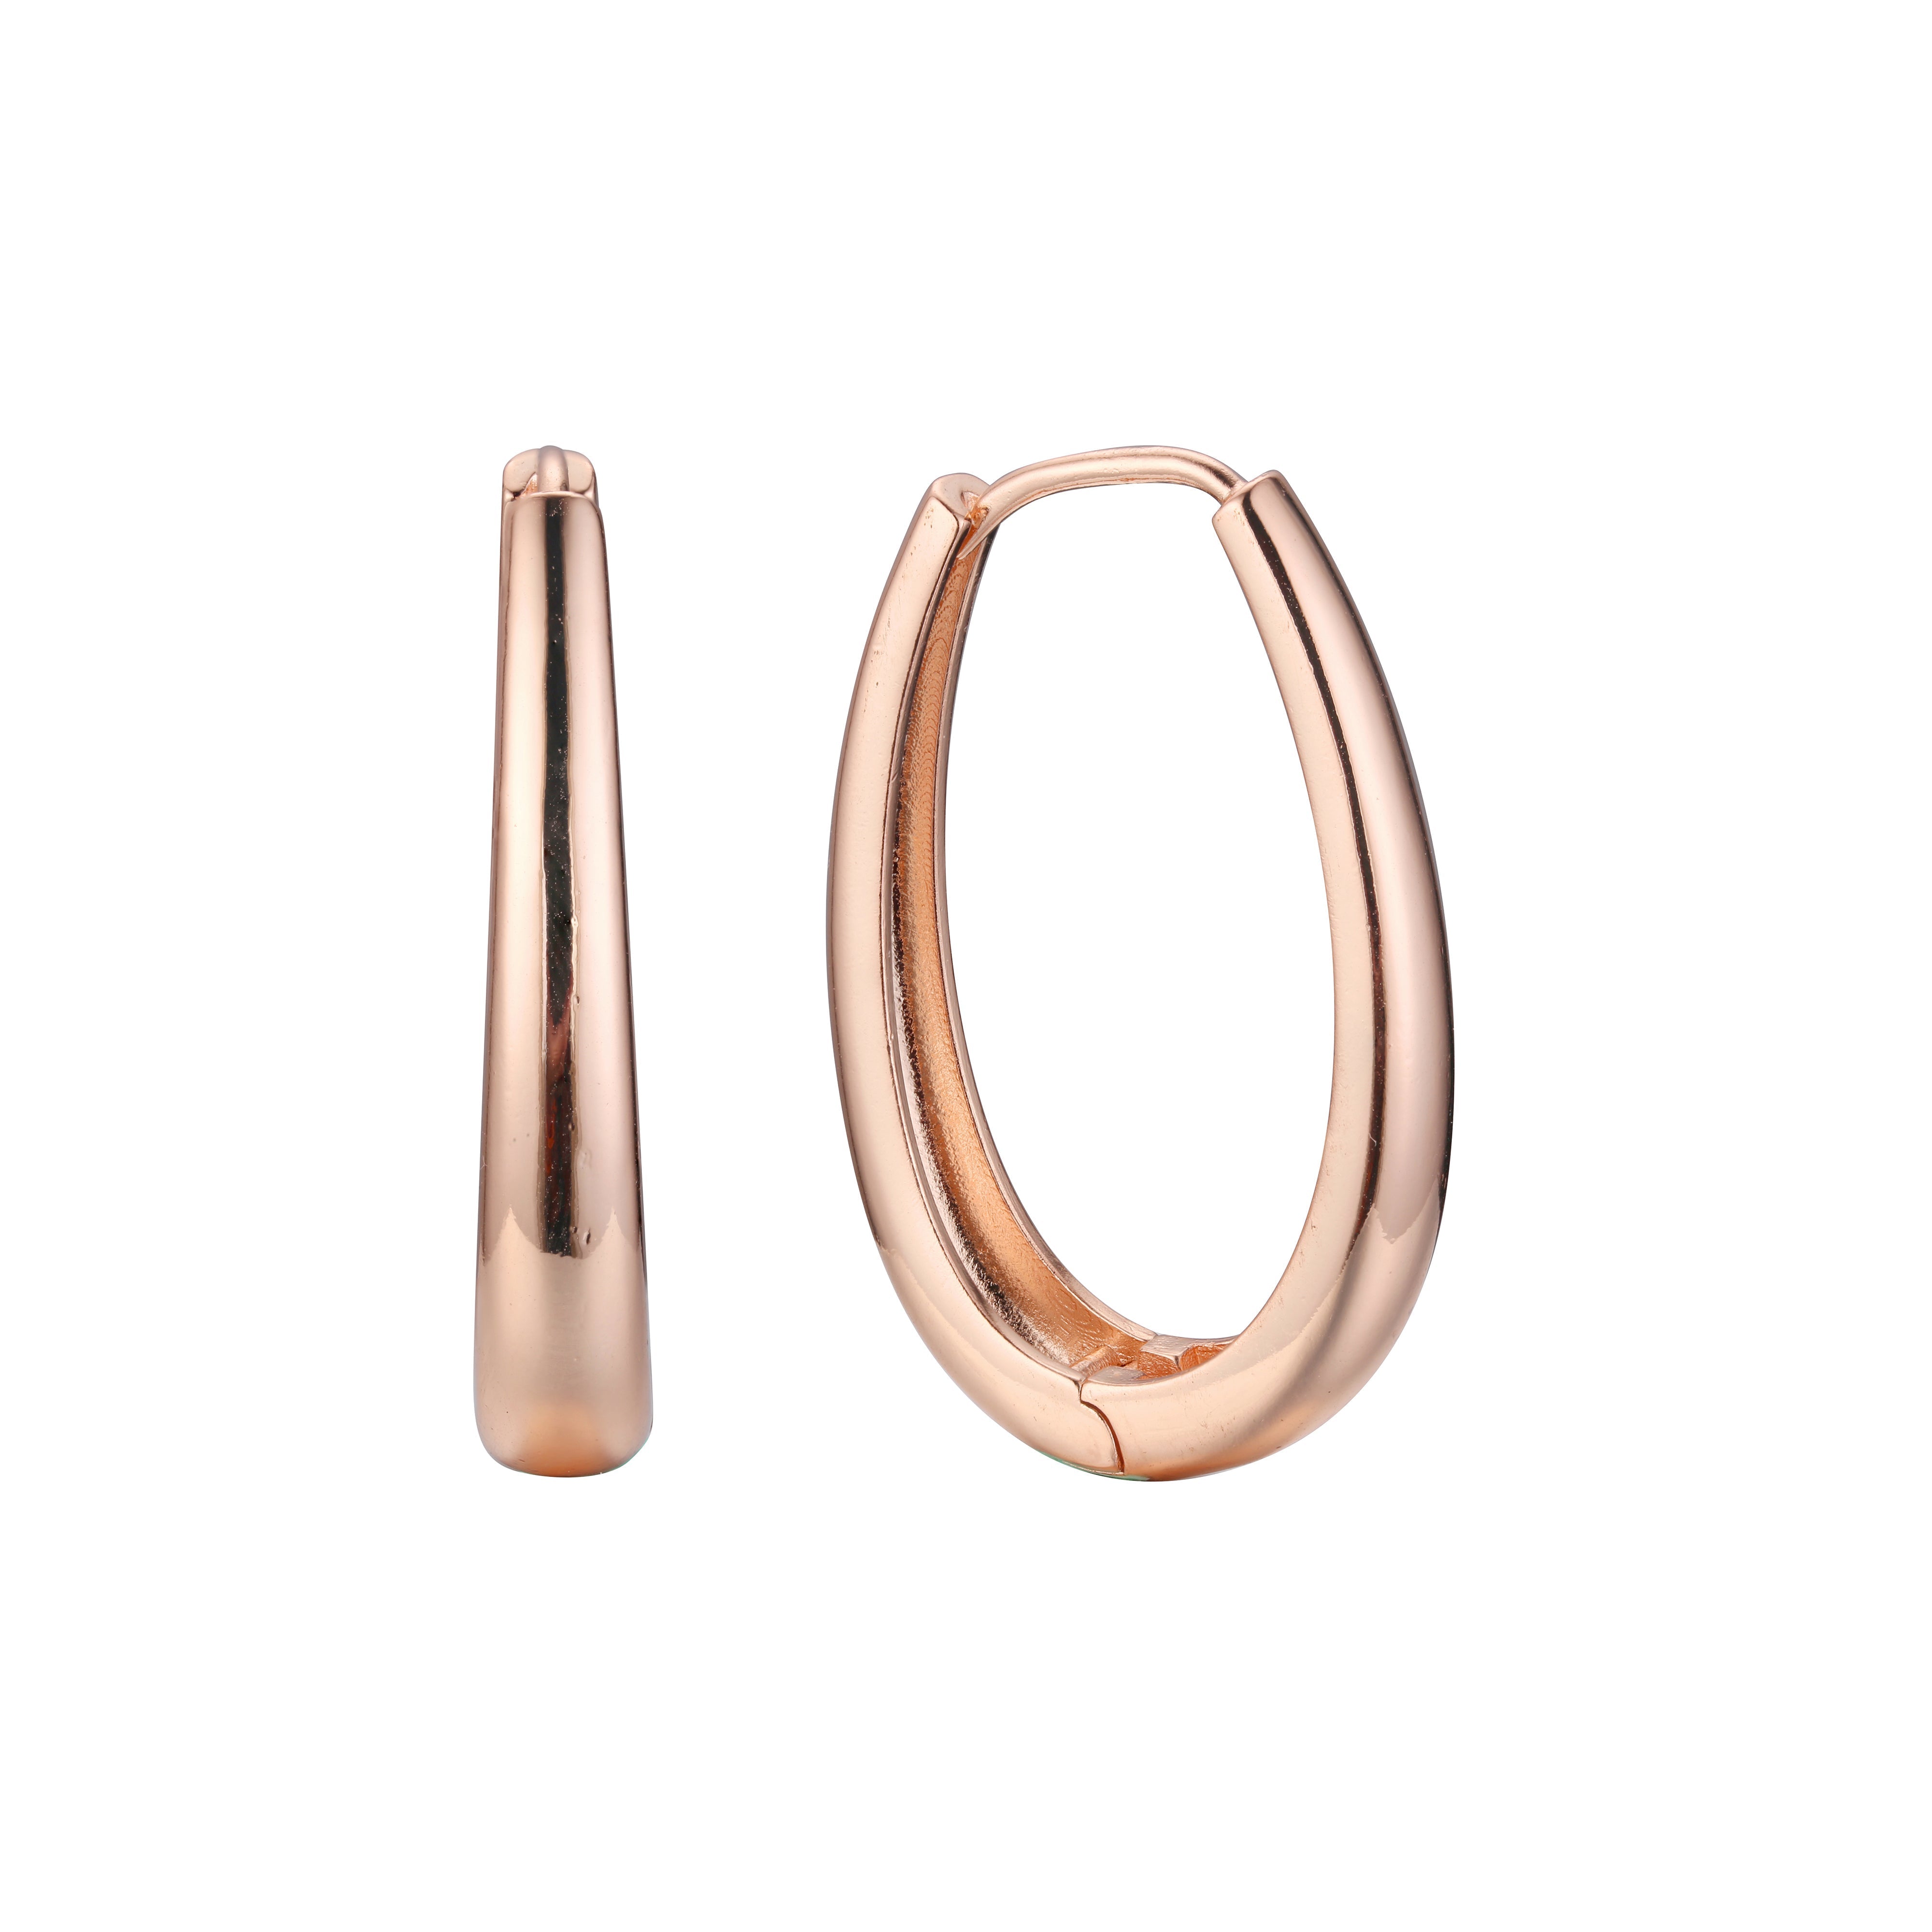 U Huggie earrings (2 sizes) in 14K Gold, White Gold, Rose Gold plating colors